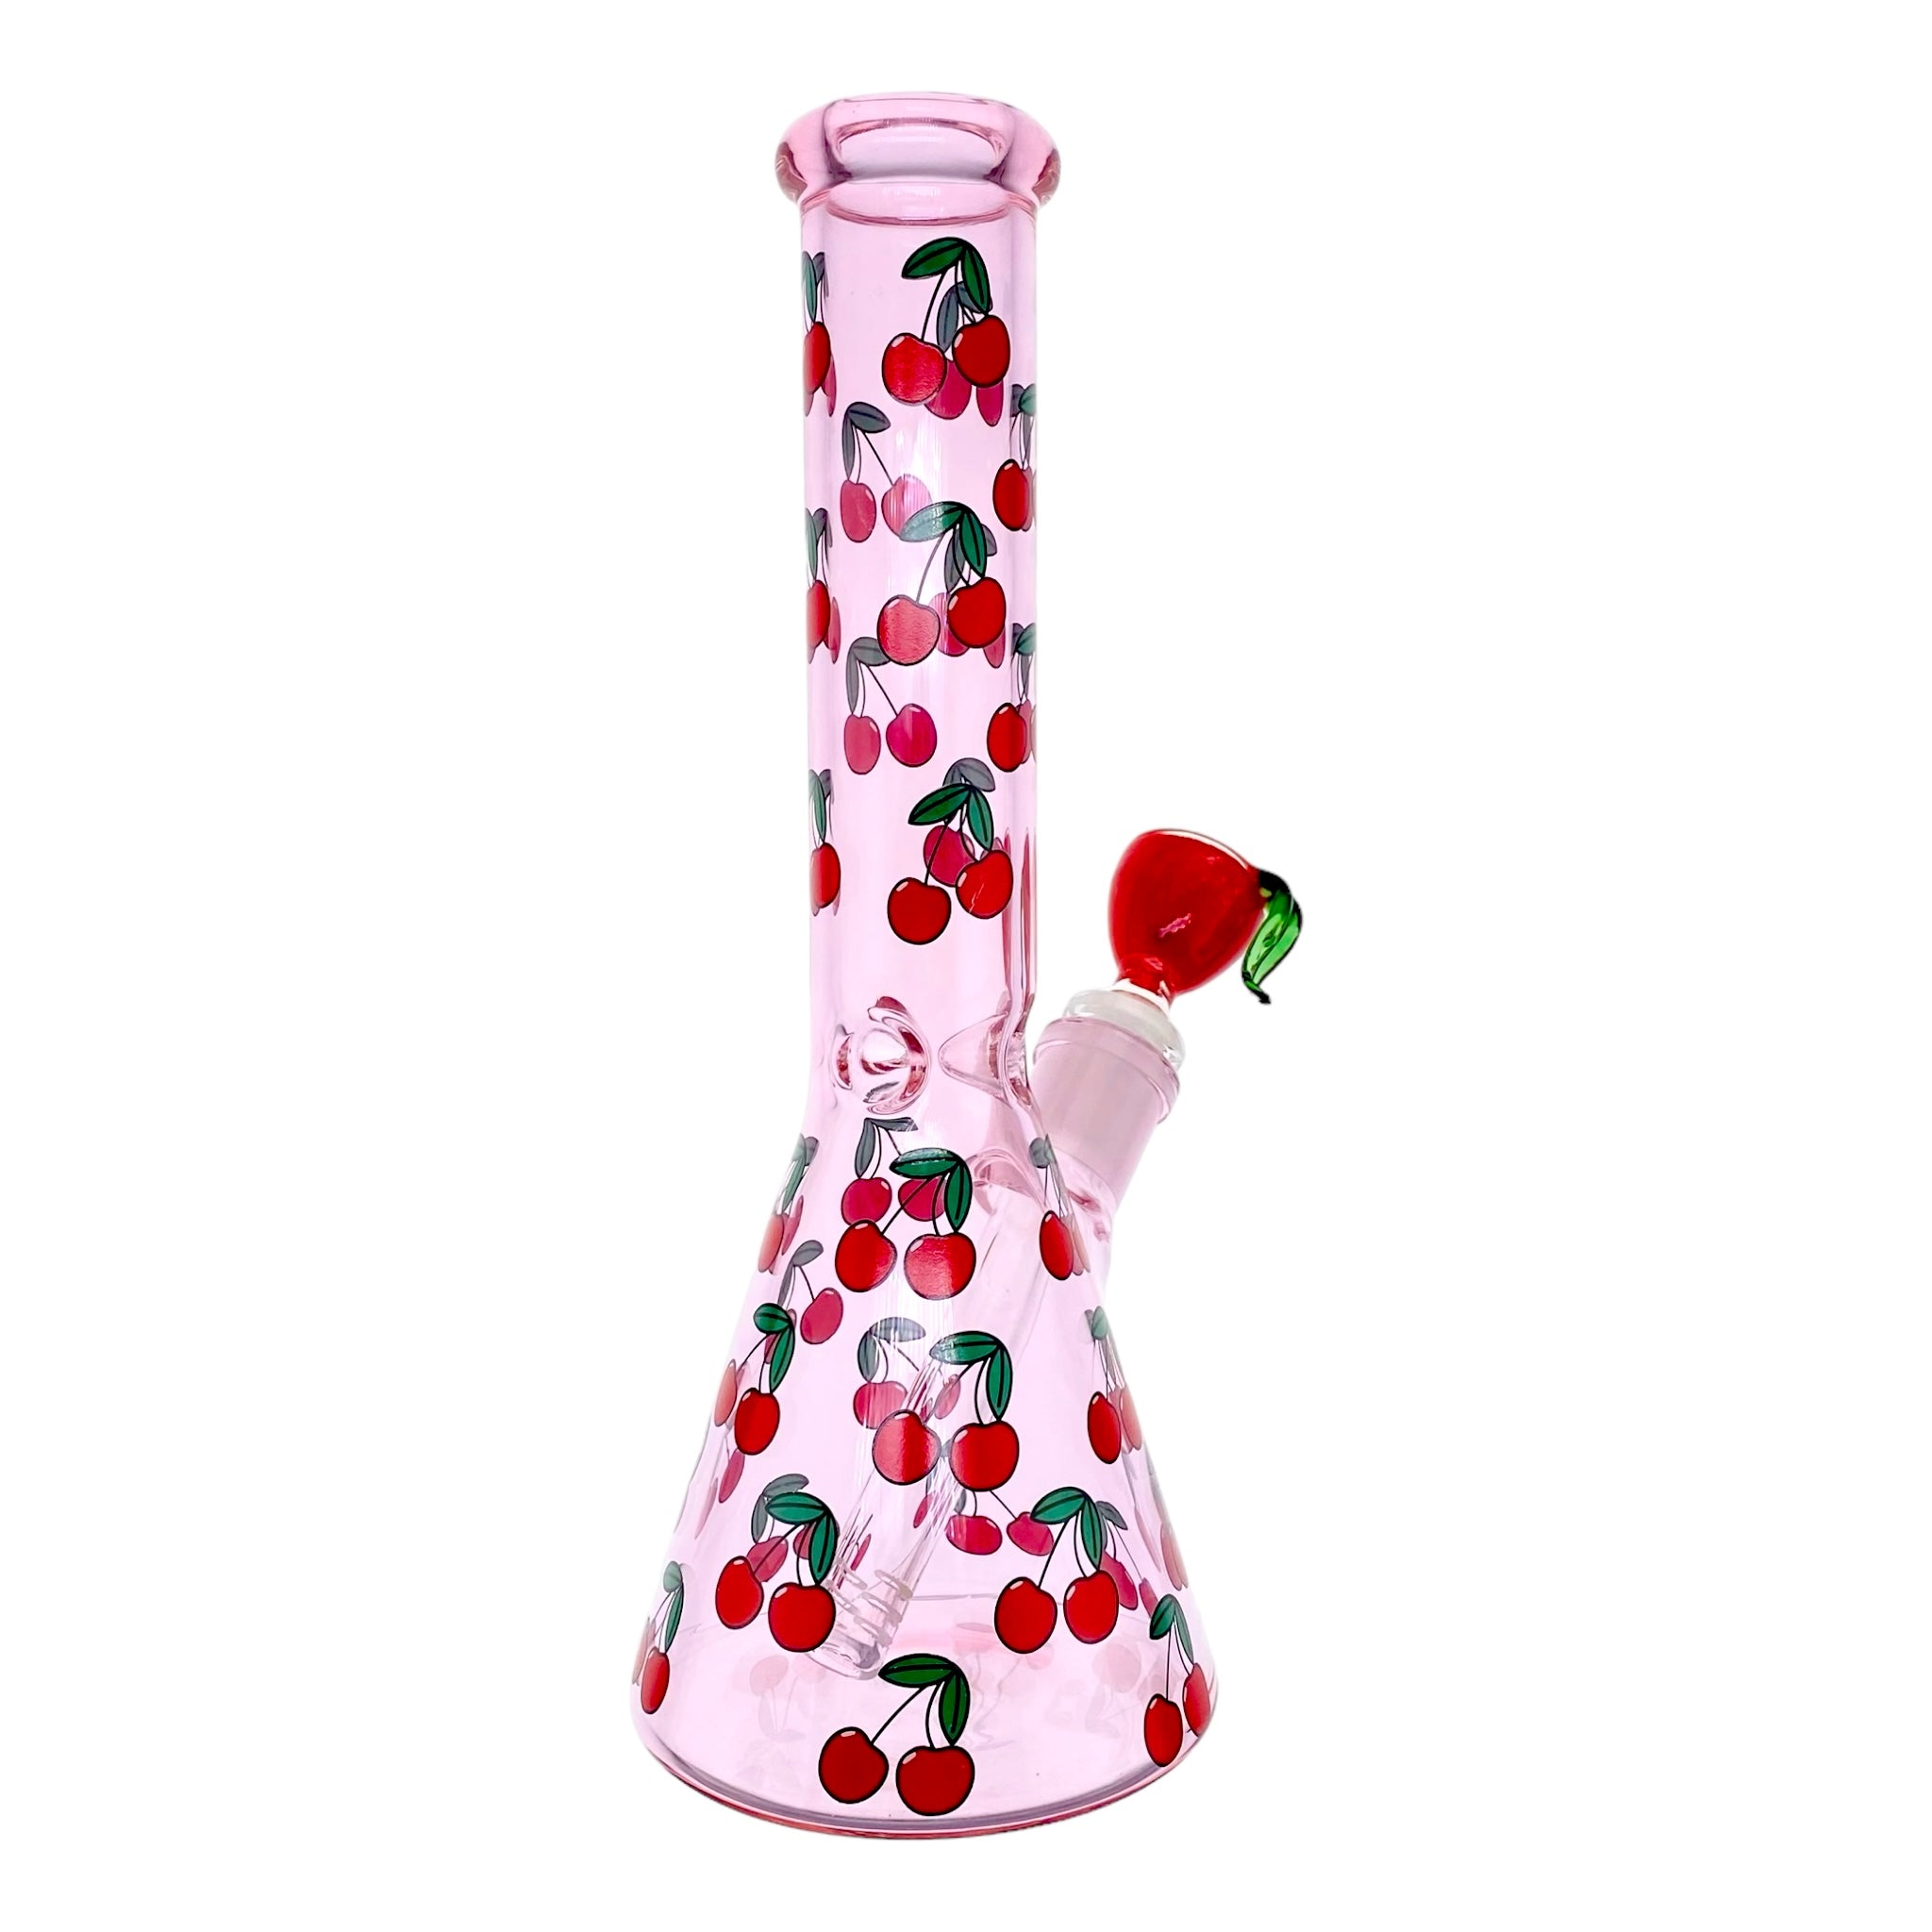 Cute Pink Beaker Bong With Cherries 10 Inches